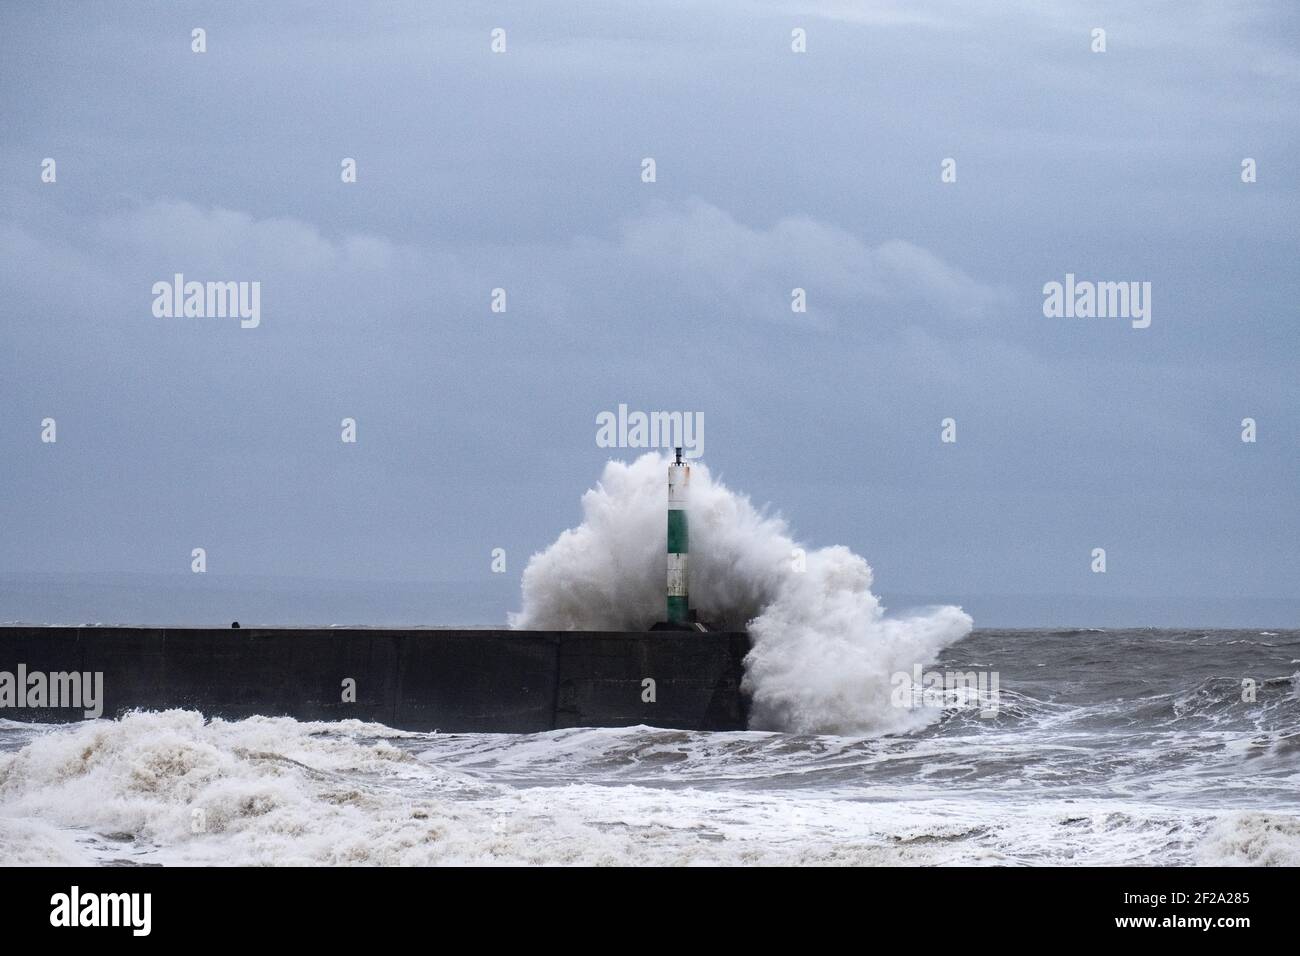 Aberystwyth, Ceredigion, Wales, UK. 11th March 2021 UK weather. A huge swell  and powerful winds create large waves that batter the coastal town of Aberystwyth. © Rhodri Jones/Alamy Live News Stock Photo